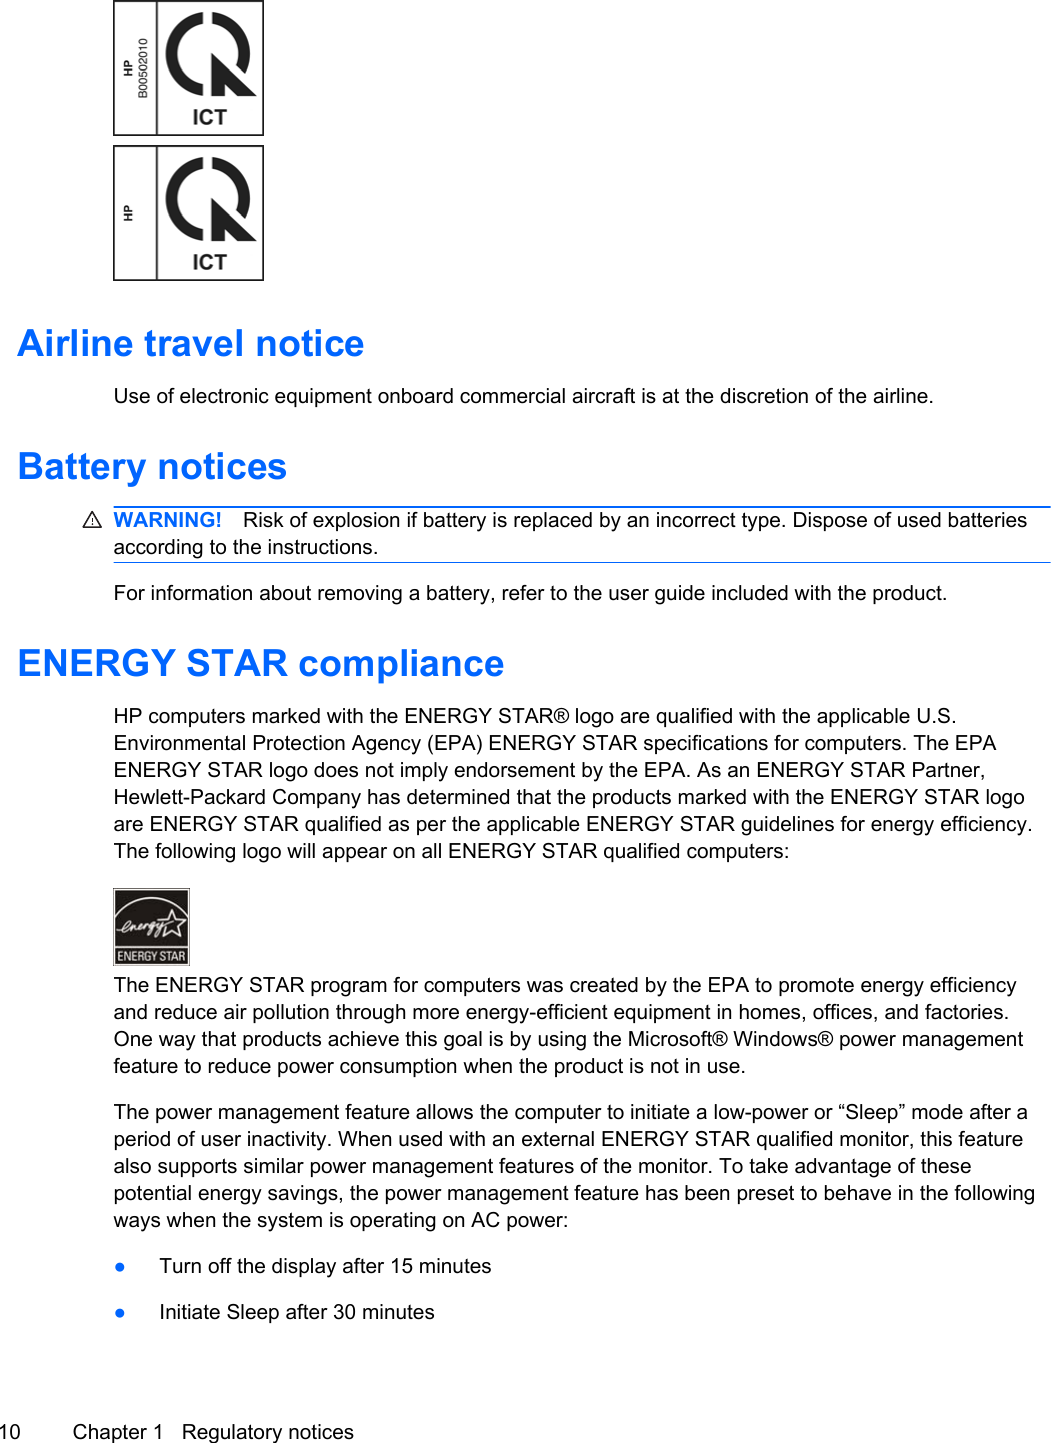 Airline travel noticeUse of electronic equipment onboard commercial aircraft is at the discretion of the airline.Battery noticesWARNING! Risk of explosion if battery is replaced by an incorrect type. Dispose of used batteriesaccording to the instructions.For information about removing a battery, refer to the user guide included with the product.ENERGY STAR complianceHP computers marked with the ENERGY STAR® logo are qualified with the applicable U.S.Environmental Protection Agency (EPA) ENERGY STAR specifications for computers. The EPAENERGY STAR logo does not imply endorsement by the EPA. As an ENERGY STAR Partner,Hewlett-Packard Company has determined that the products marked with the ENERGY STAR logoare ENERGY STAR qualified as per the applicable ENERGY STAR guidelines for energy efficiency.The following logo will appear on all ENERGY STAR qualified computers:The ENERGY STAR program for computers was created by the EPA to promote energy efficiencyand reduce air pollution through more energy-efficient equipment in homes, offices, and factories.One way that products achieve this goal is by using the Microsoft® Windows® power managementfeature to reduce power consumption when the product is not in use.The power management feature allows the computer to initiate a low-power or “Sleep” mode after aperiod of user inactivity. When used with an external ENERGY STAR qualified monitor, this featurealso supports similar power management features of the monitor. To take advantage of thesepotential energy savings, the power management feature has been preset to behave in the followingways when the system is operating on AC power:●Turn off the display after 15 minutes●Initiate Sleep after 30 minutes10 Chapter 1   Regulatory notices